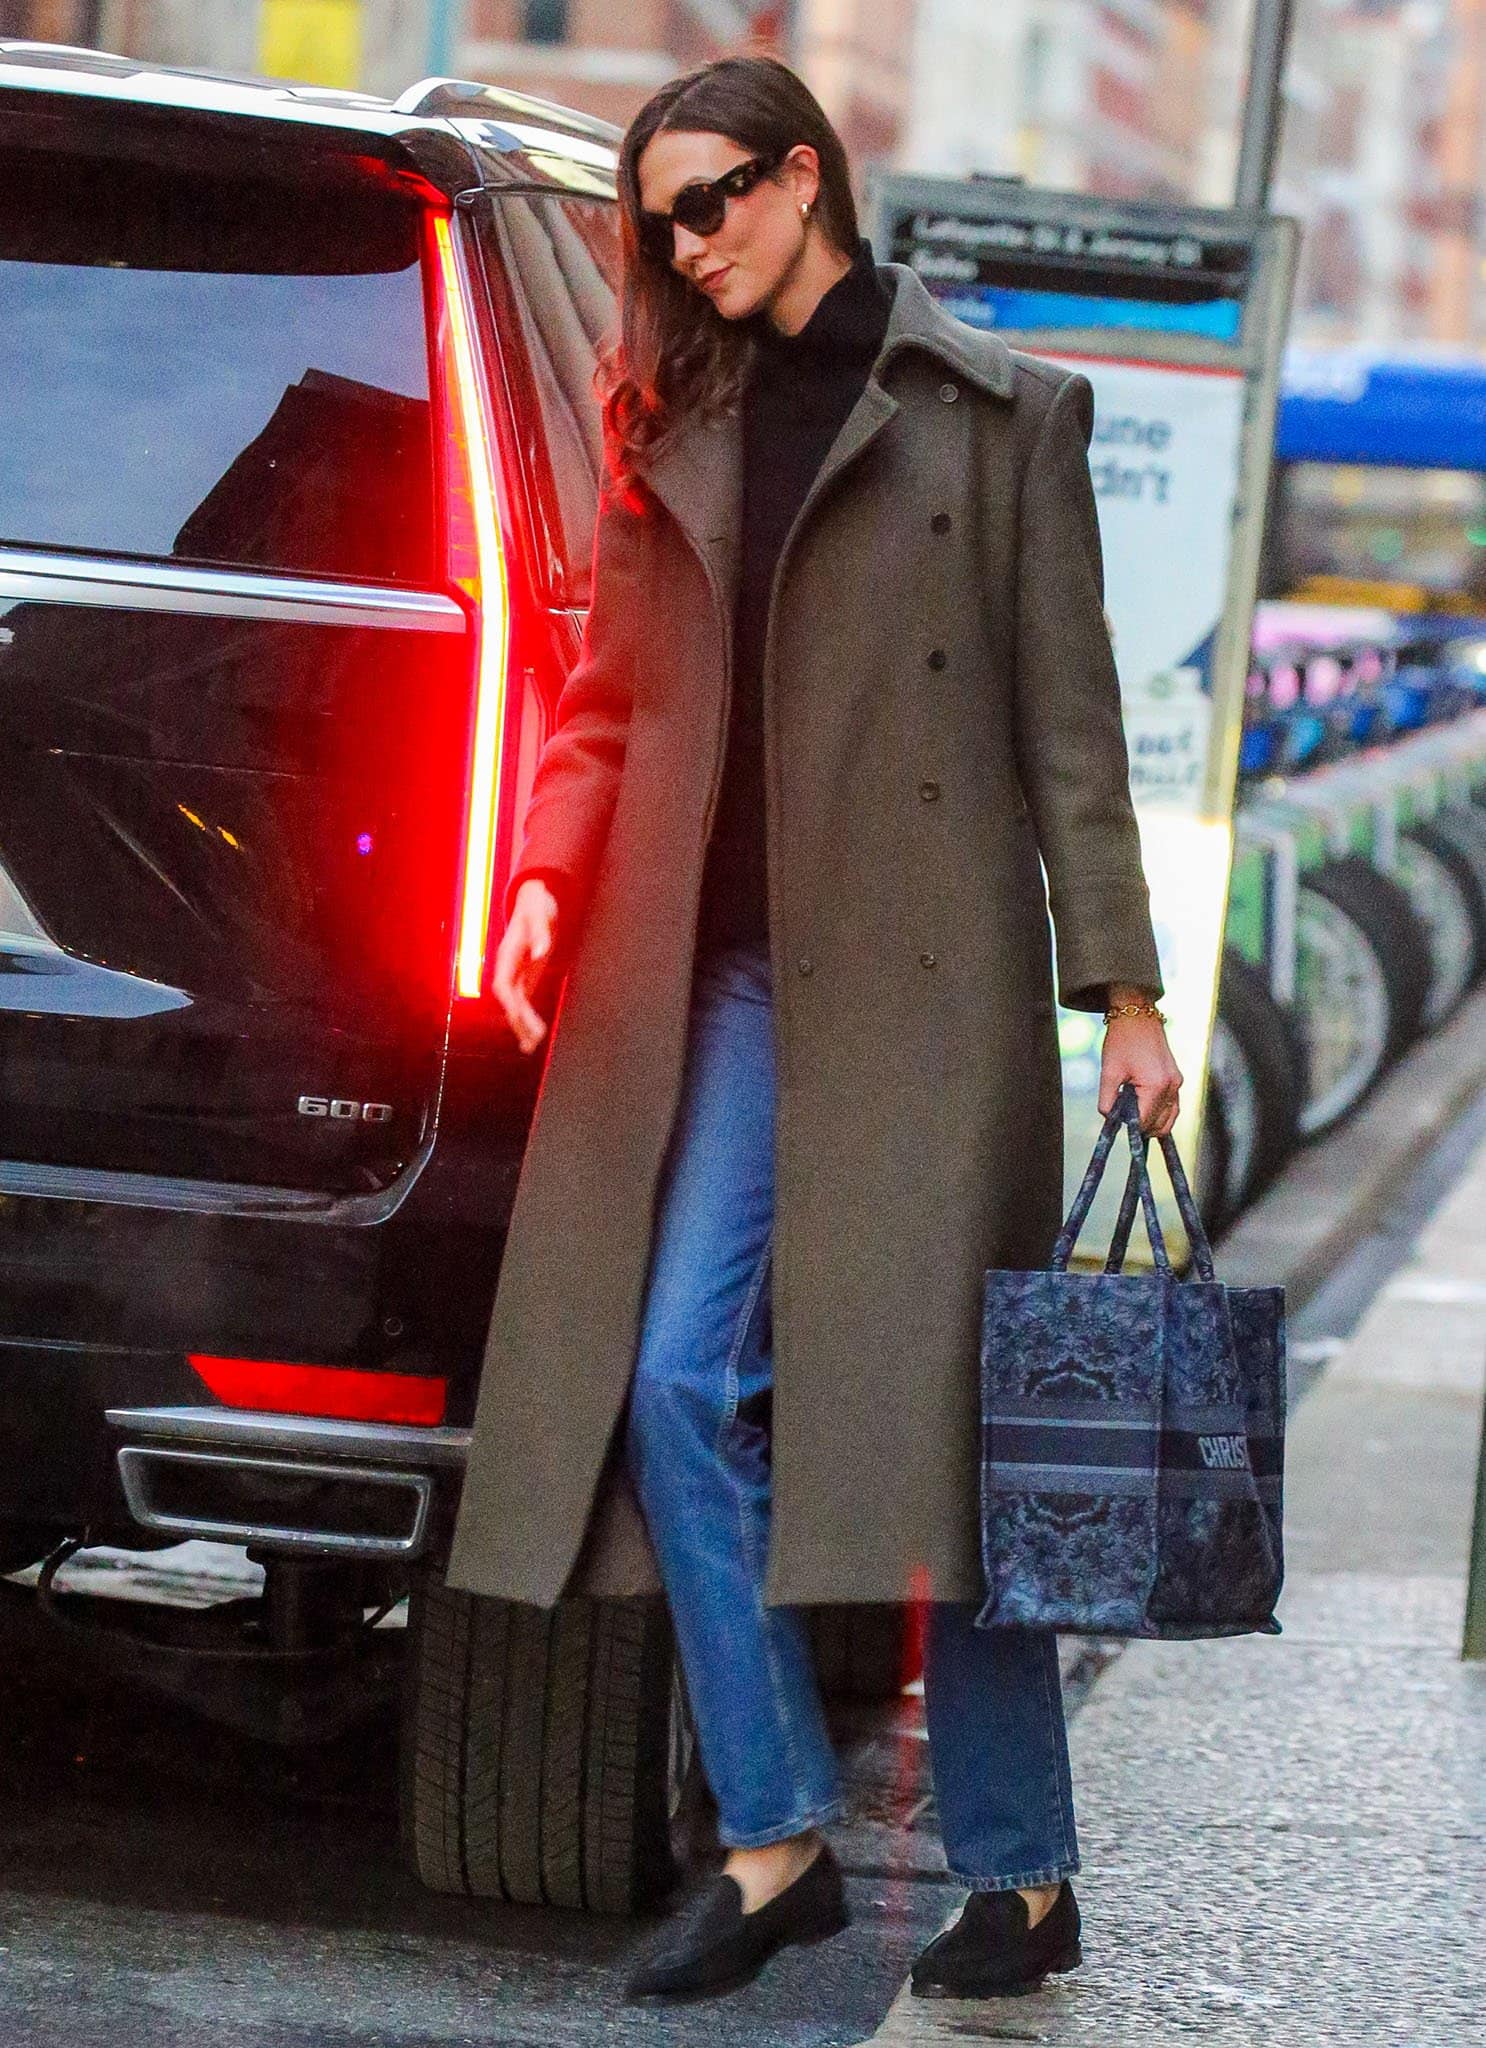 Karlie Kloss styles her basic but chic winter outfit with Prada tortoise sunglasses and a Dior Book tote